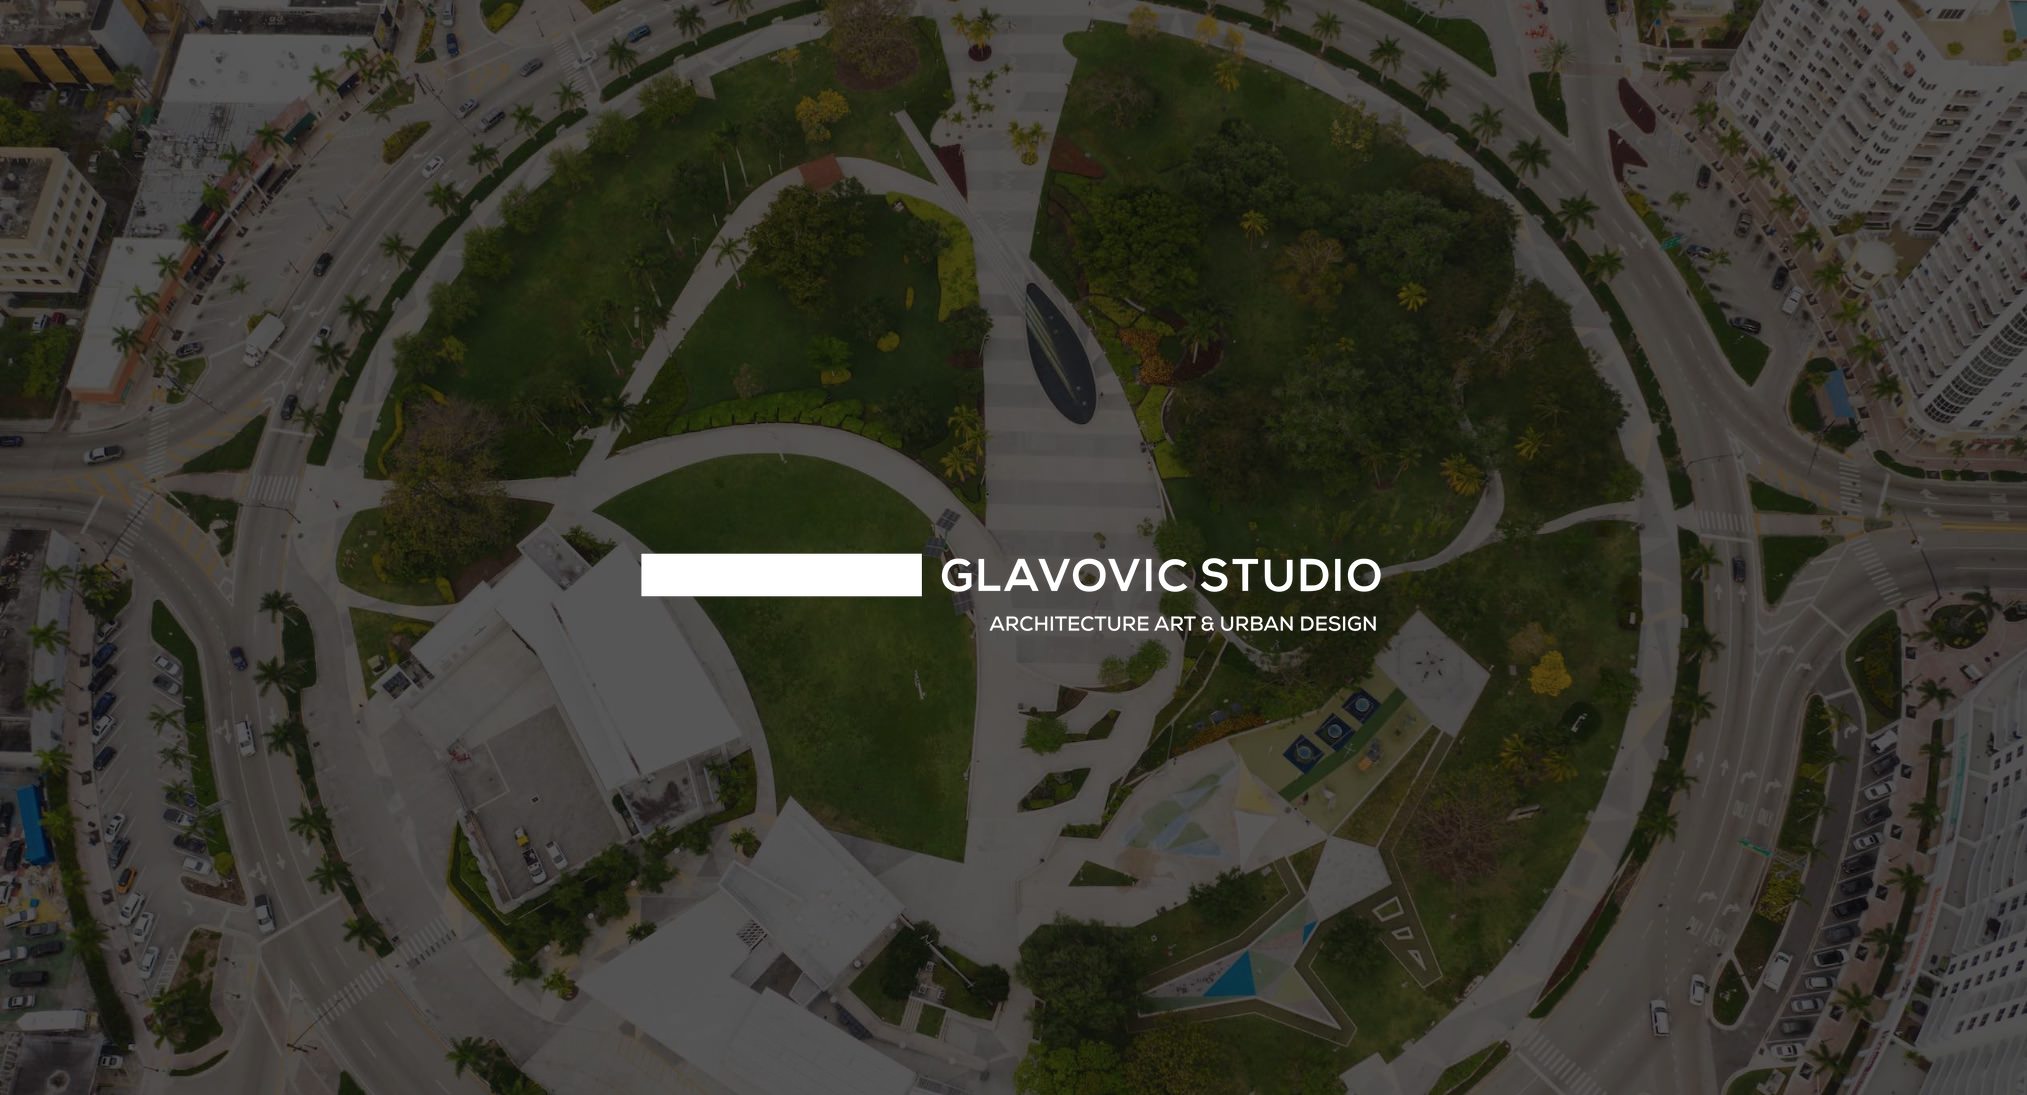 IU C&I Studios Page White Glavovic Studio Architecture Art & Urban Design log with background of aerial view of Arts Park at Young Circle